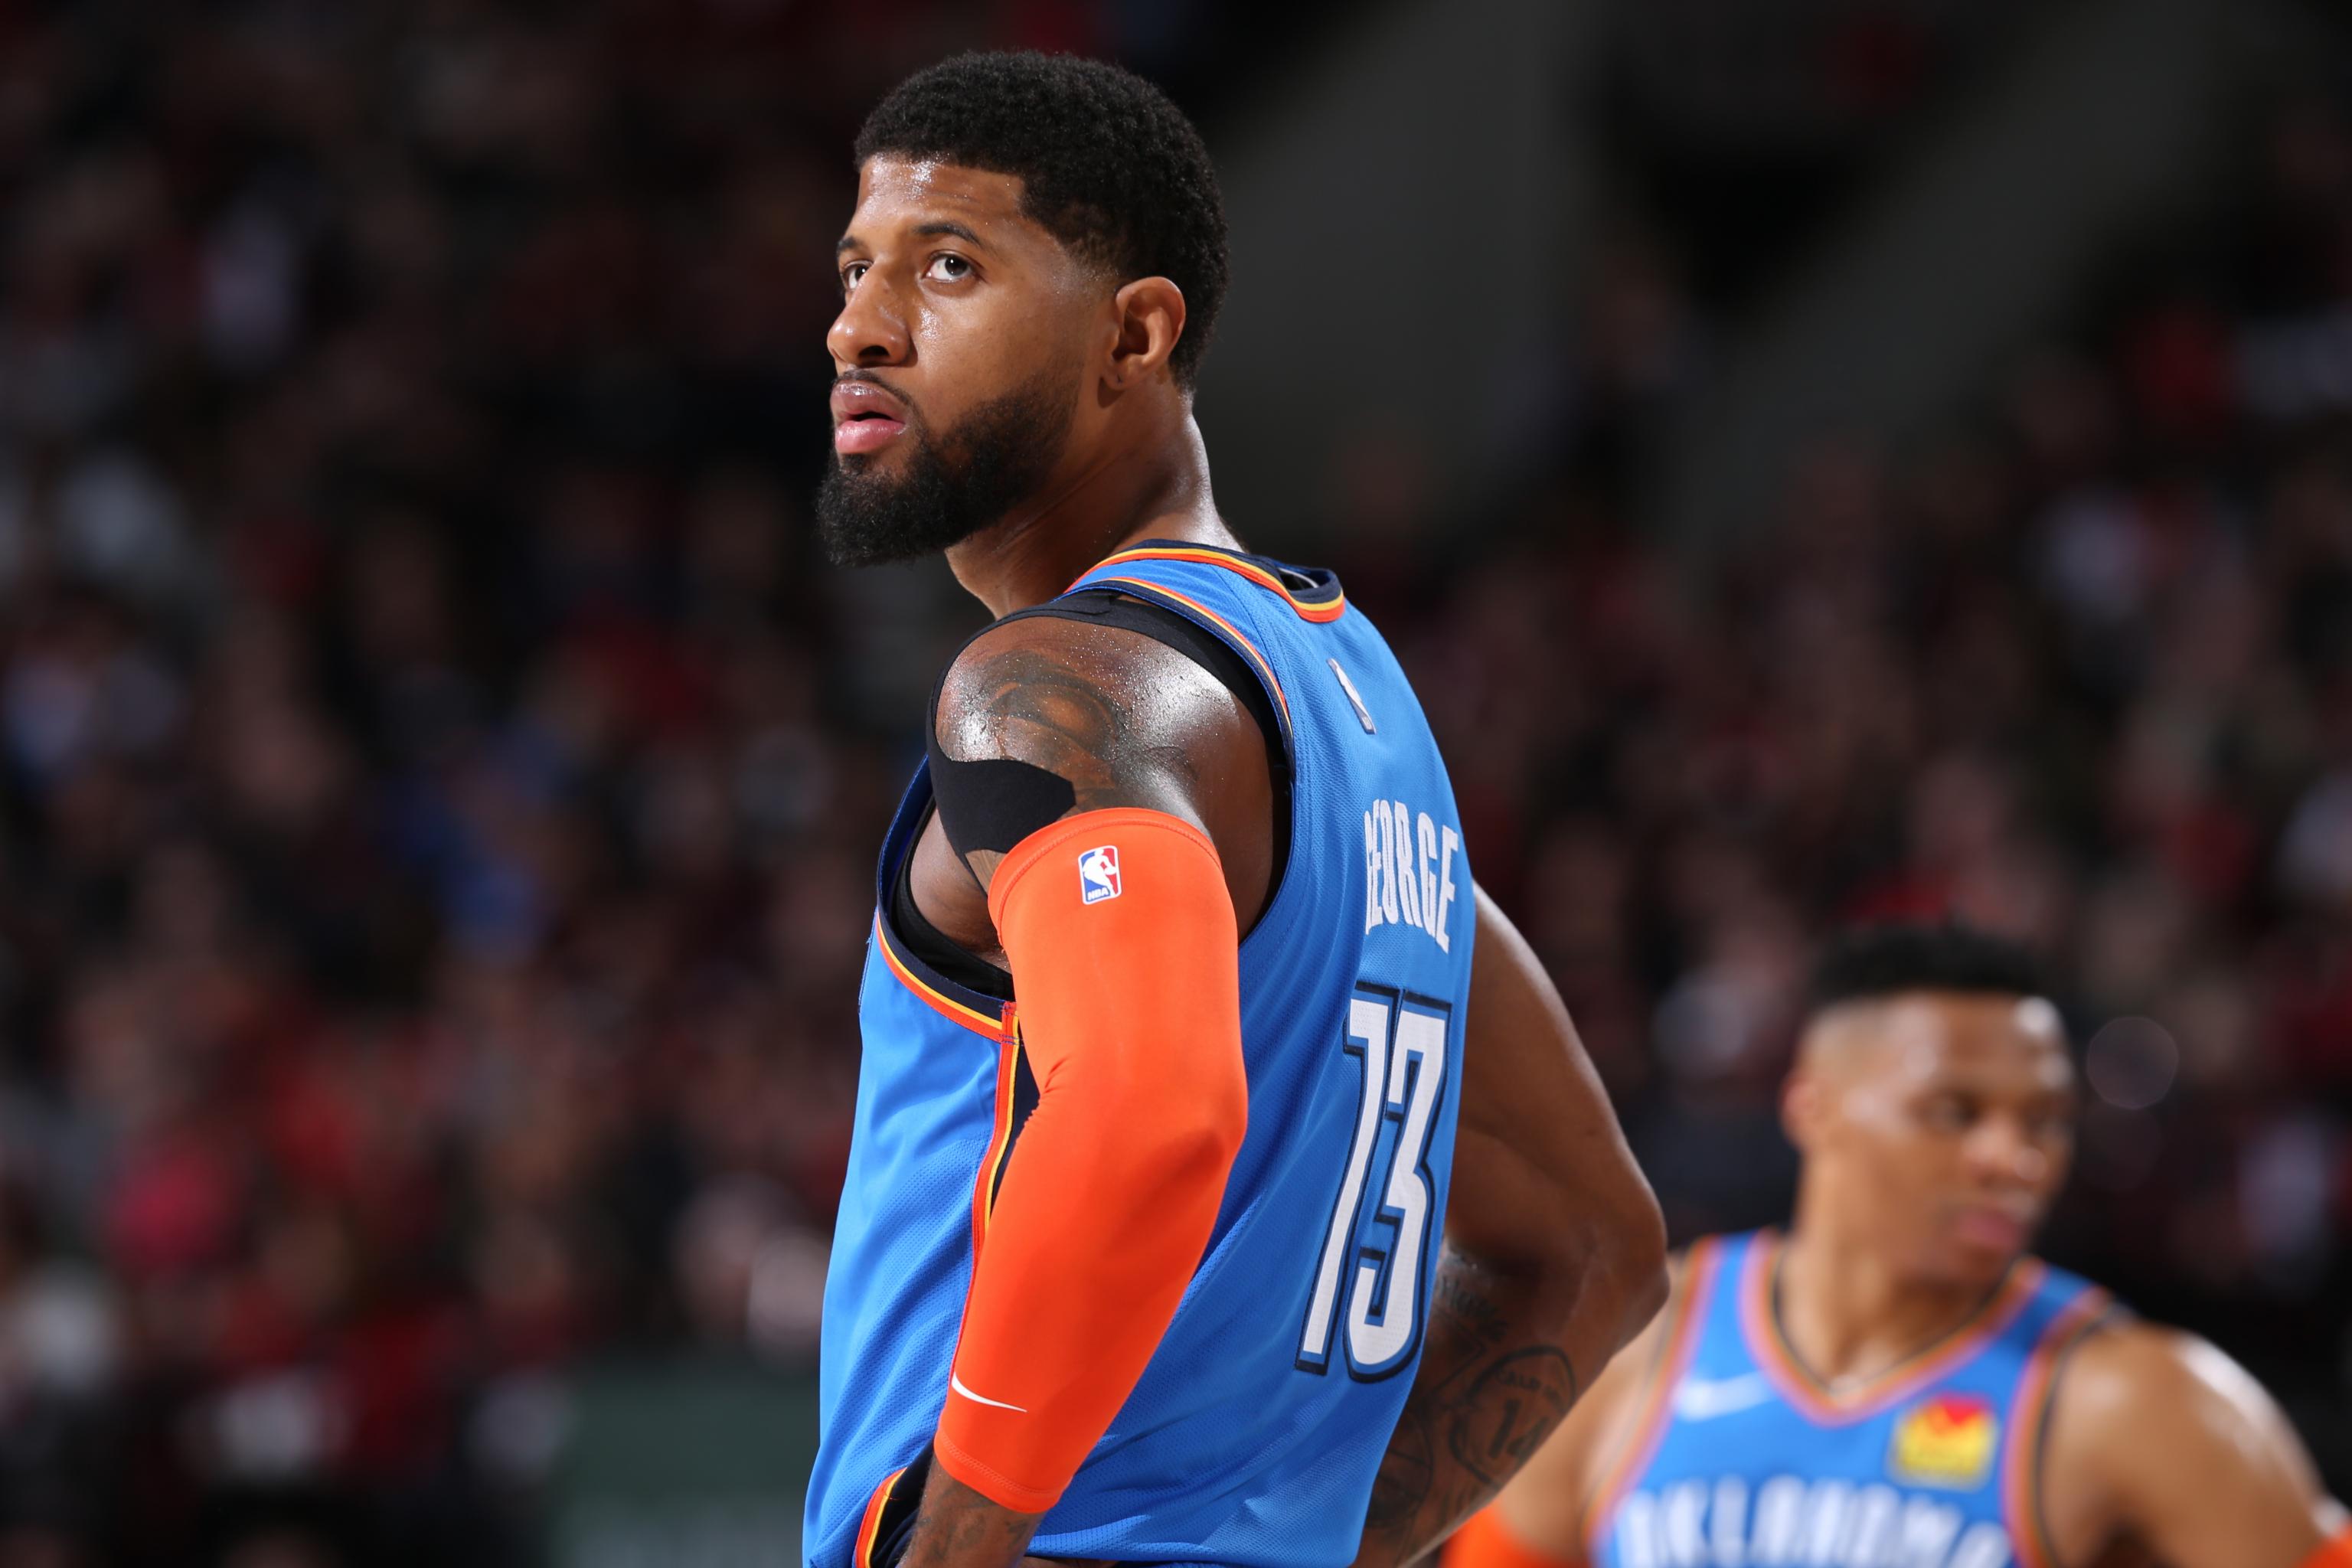 NBA Playoffs 2019: Paul George says he 'couldn't even lift my